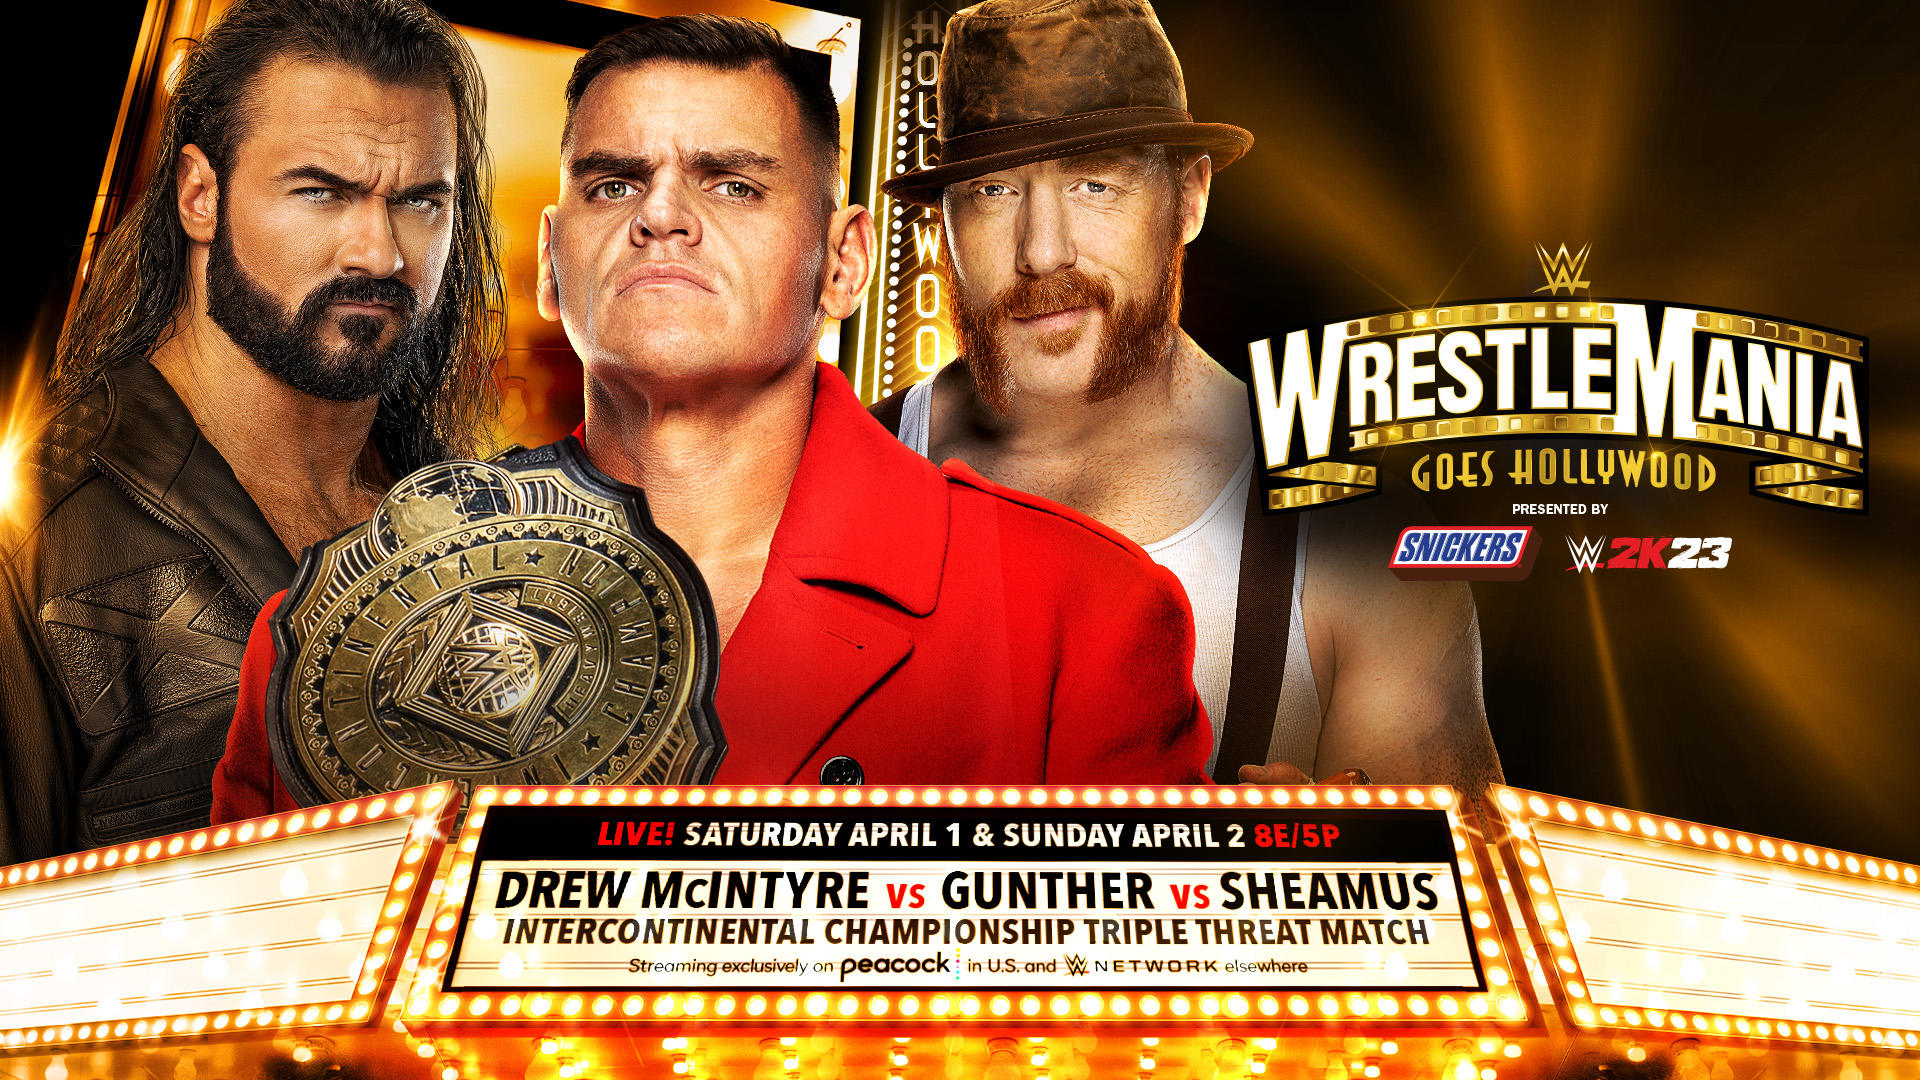 Gunther will defend the Intercontinental Championship in a triple threat match with Drew McIntyre and Sheamus at WrestleMania 39.